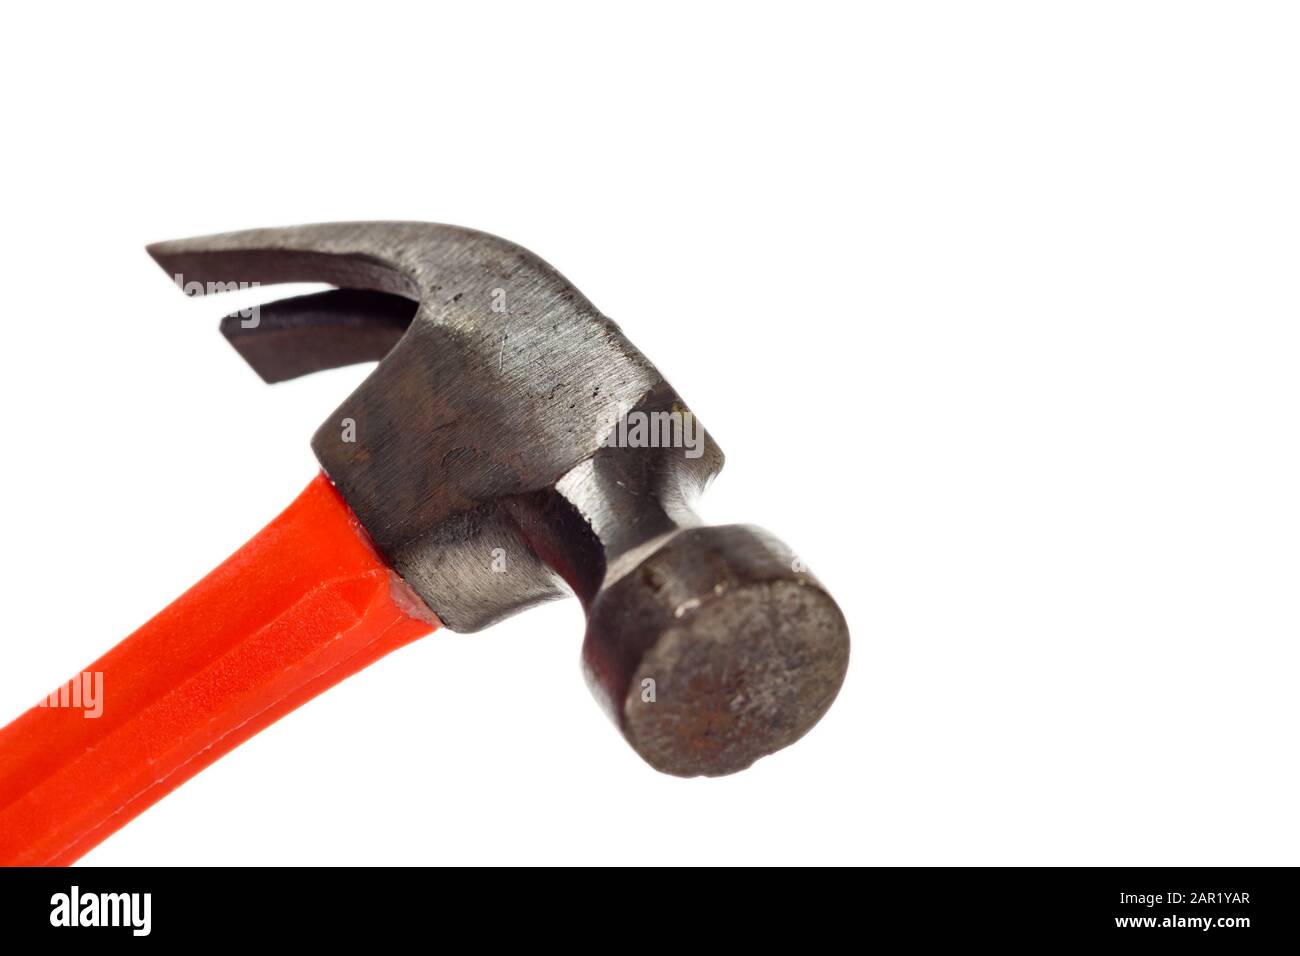 https://c8.alamy.com/comp/2AR1YAR/closeup-shot-of-a-red-metal-hammer-isolated-on-a-white-background-2AR1YAR.jpg